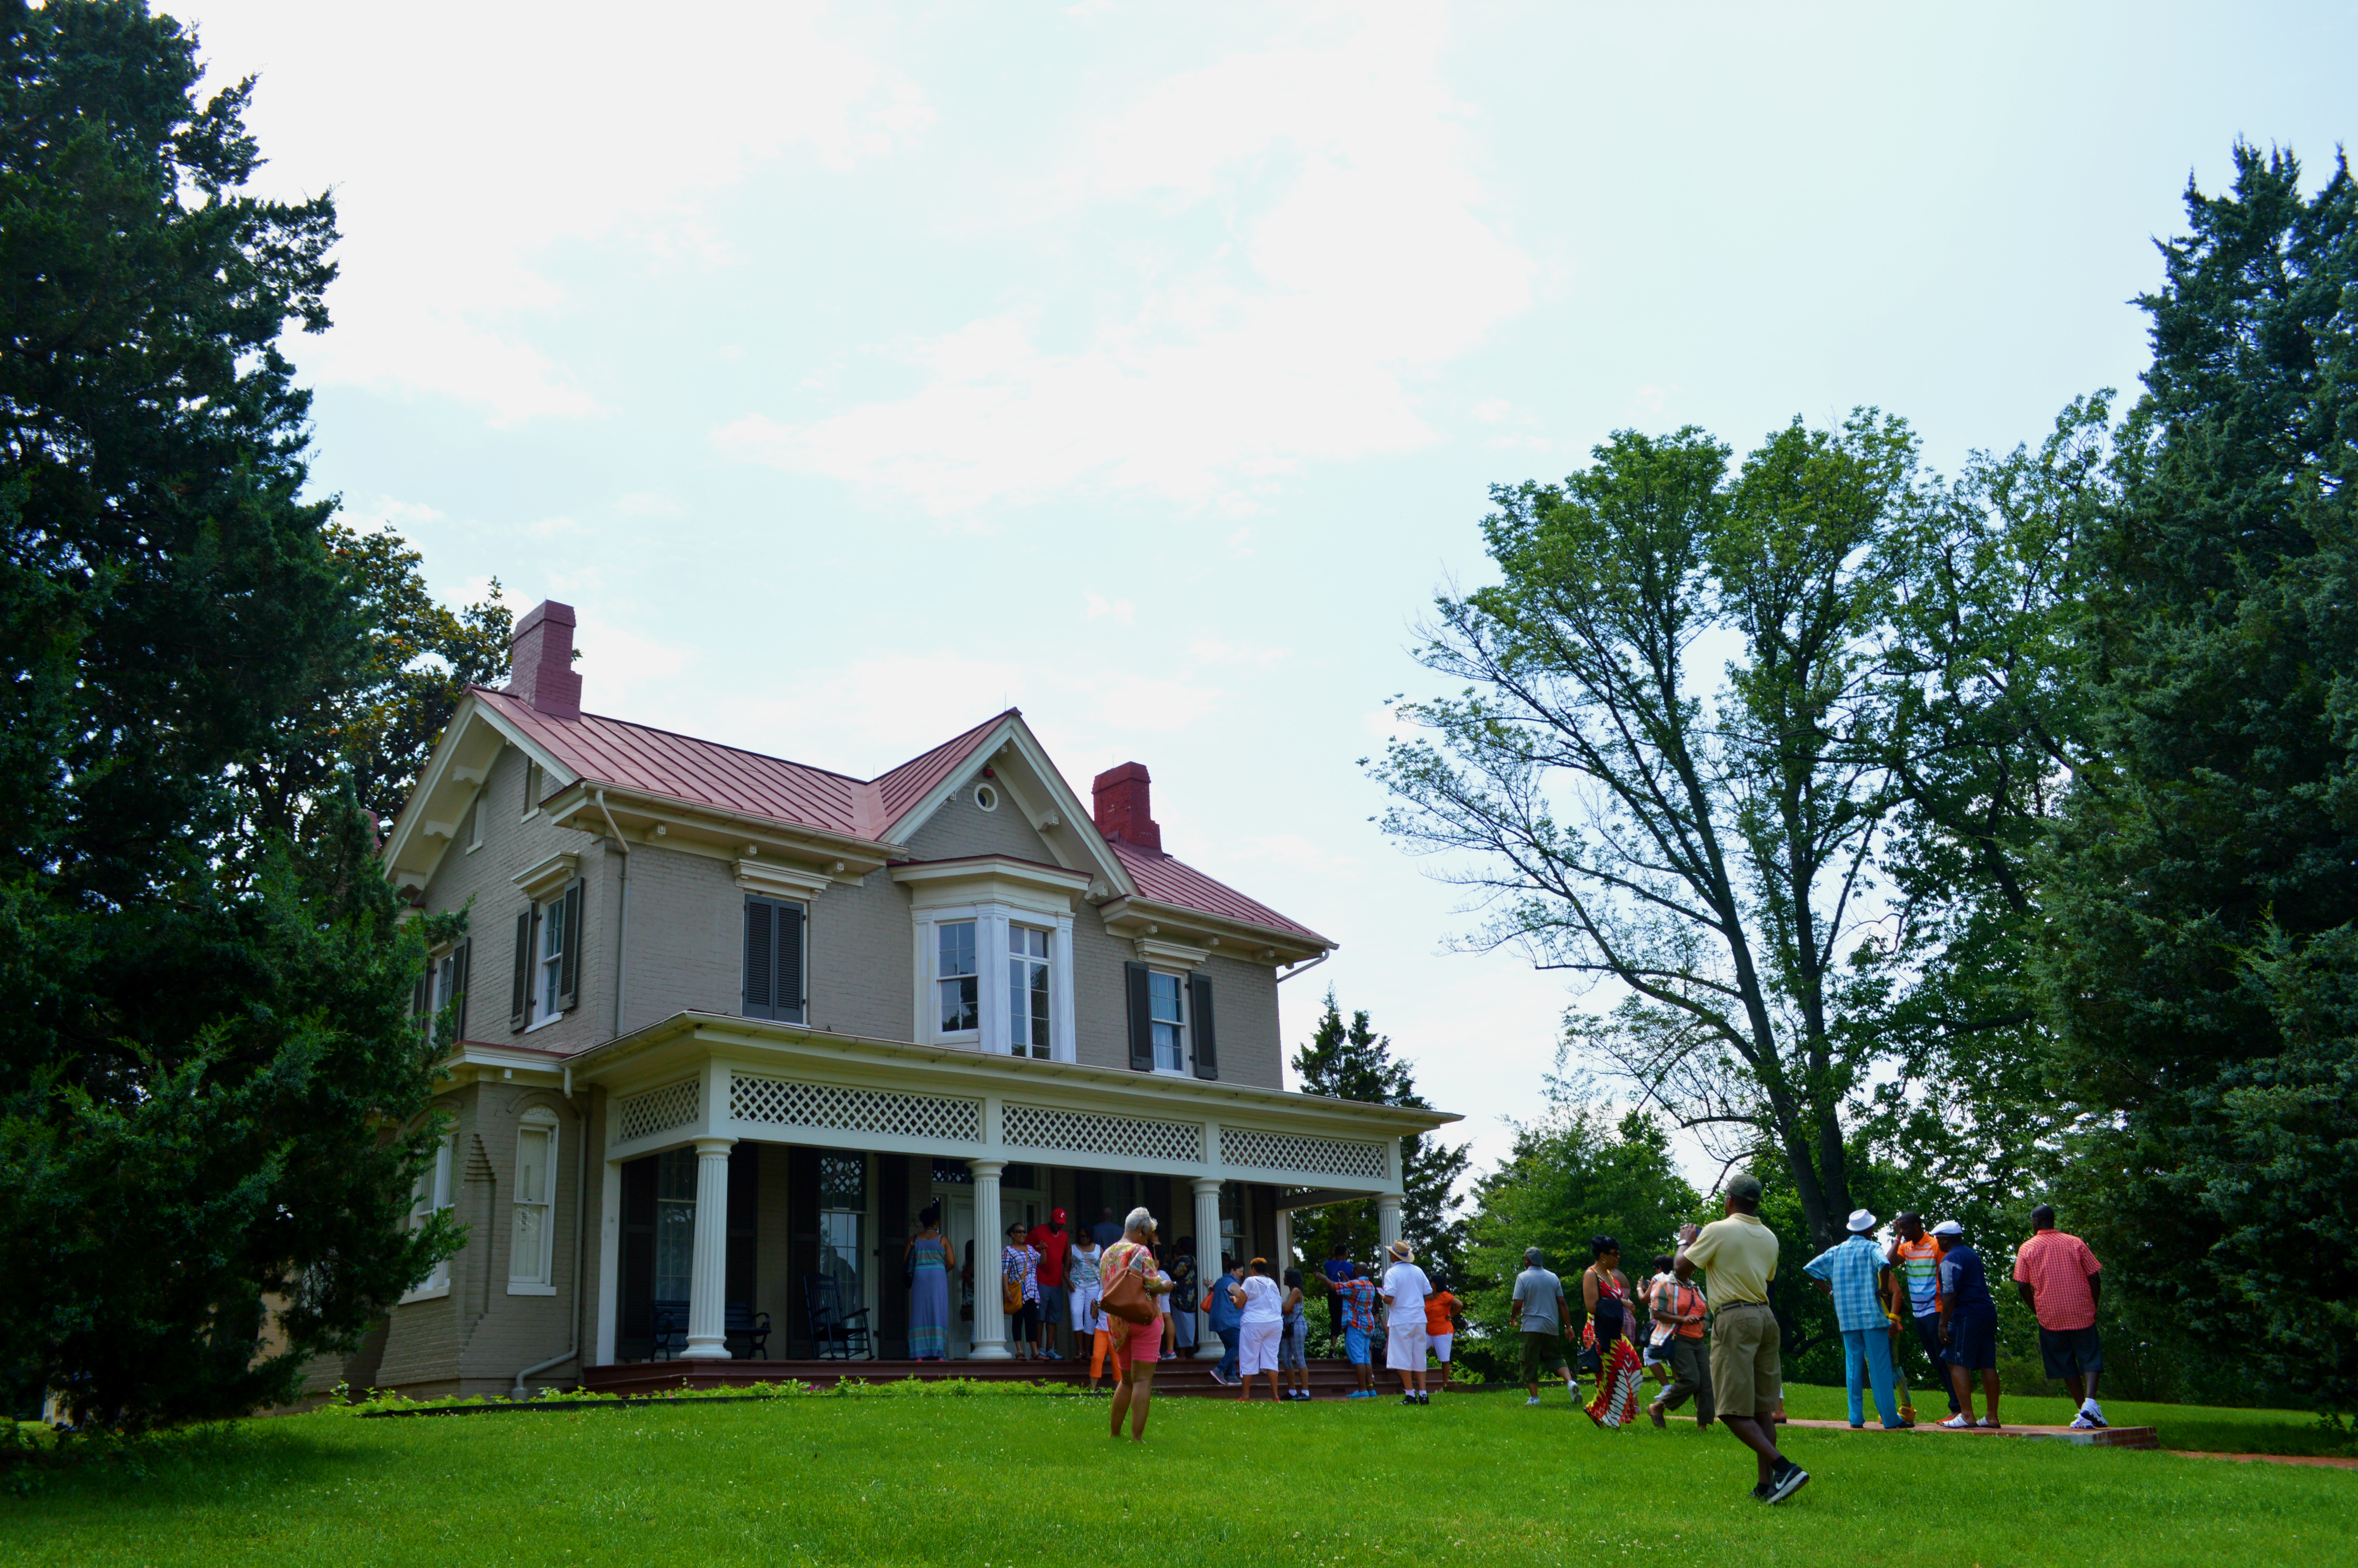 Visitors take photos in front of a historic house